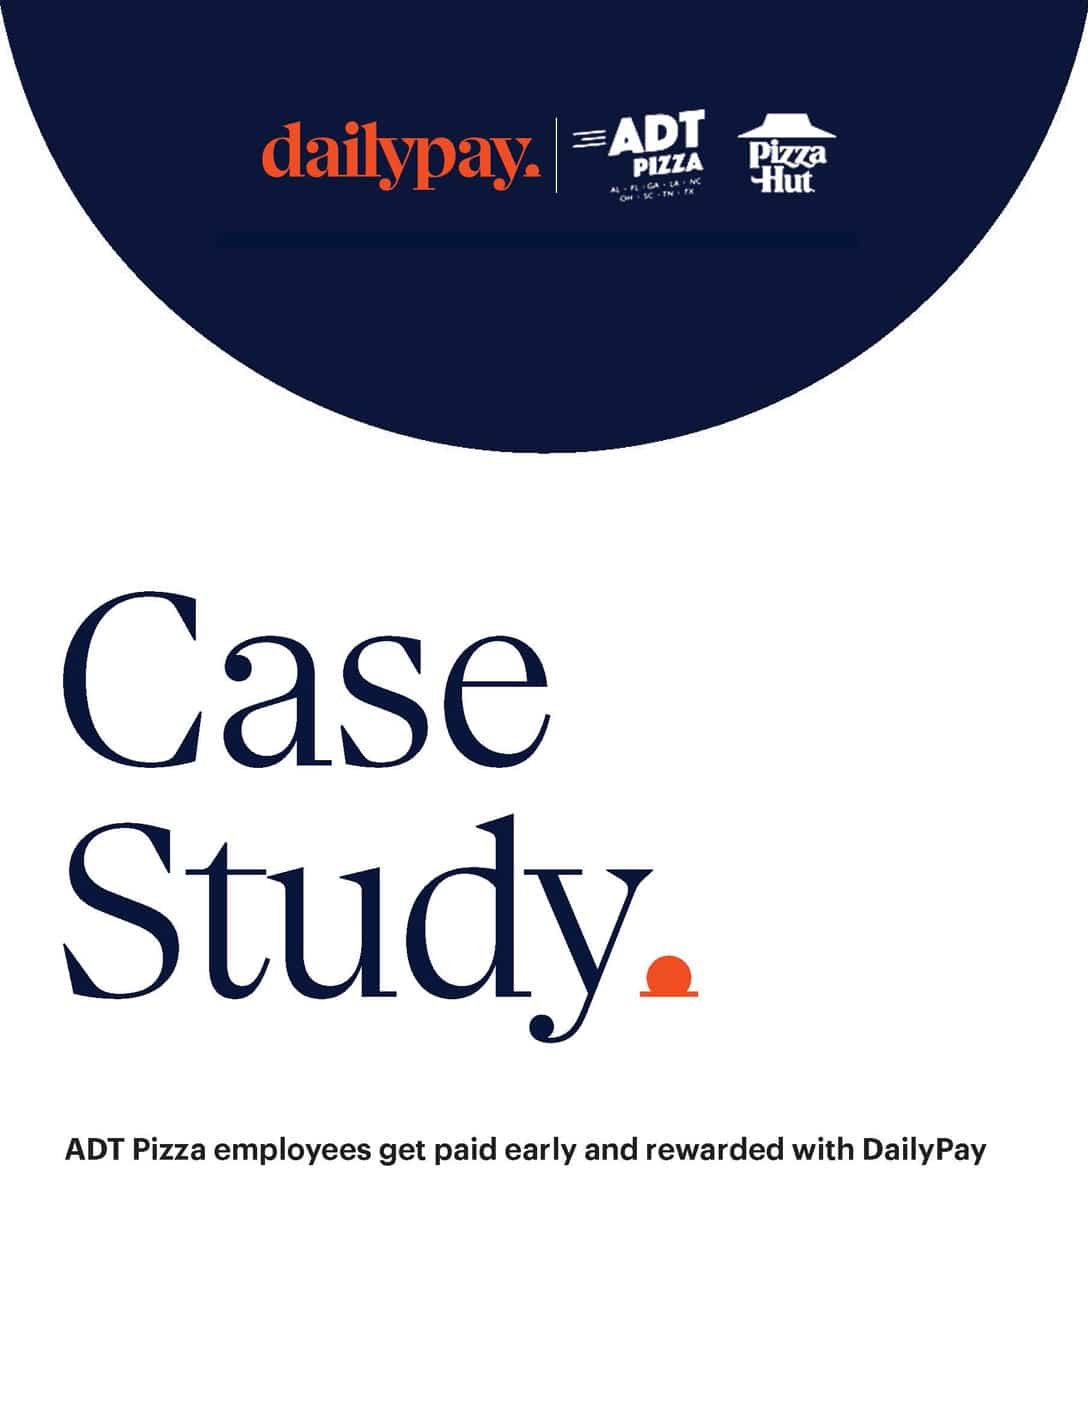 Image features logos for DailyPay, ADT Pizza, and Pizza Hut, followed by the title "Case Study." Below, text reads: "ADT Pizza employees get paid early and rewarded with DailyPay." The design comprises a dark blue curved header containing the logos and a clean white background for the text.